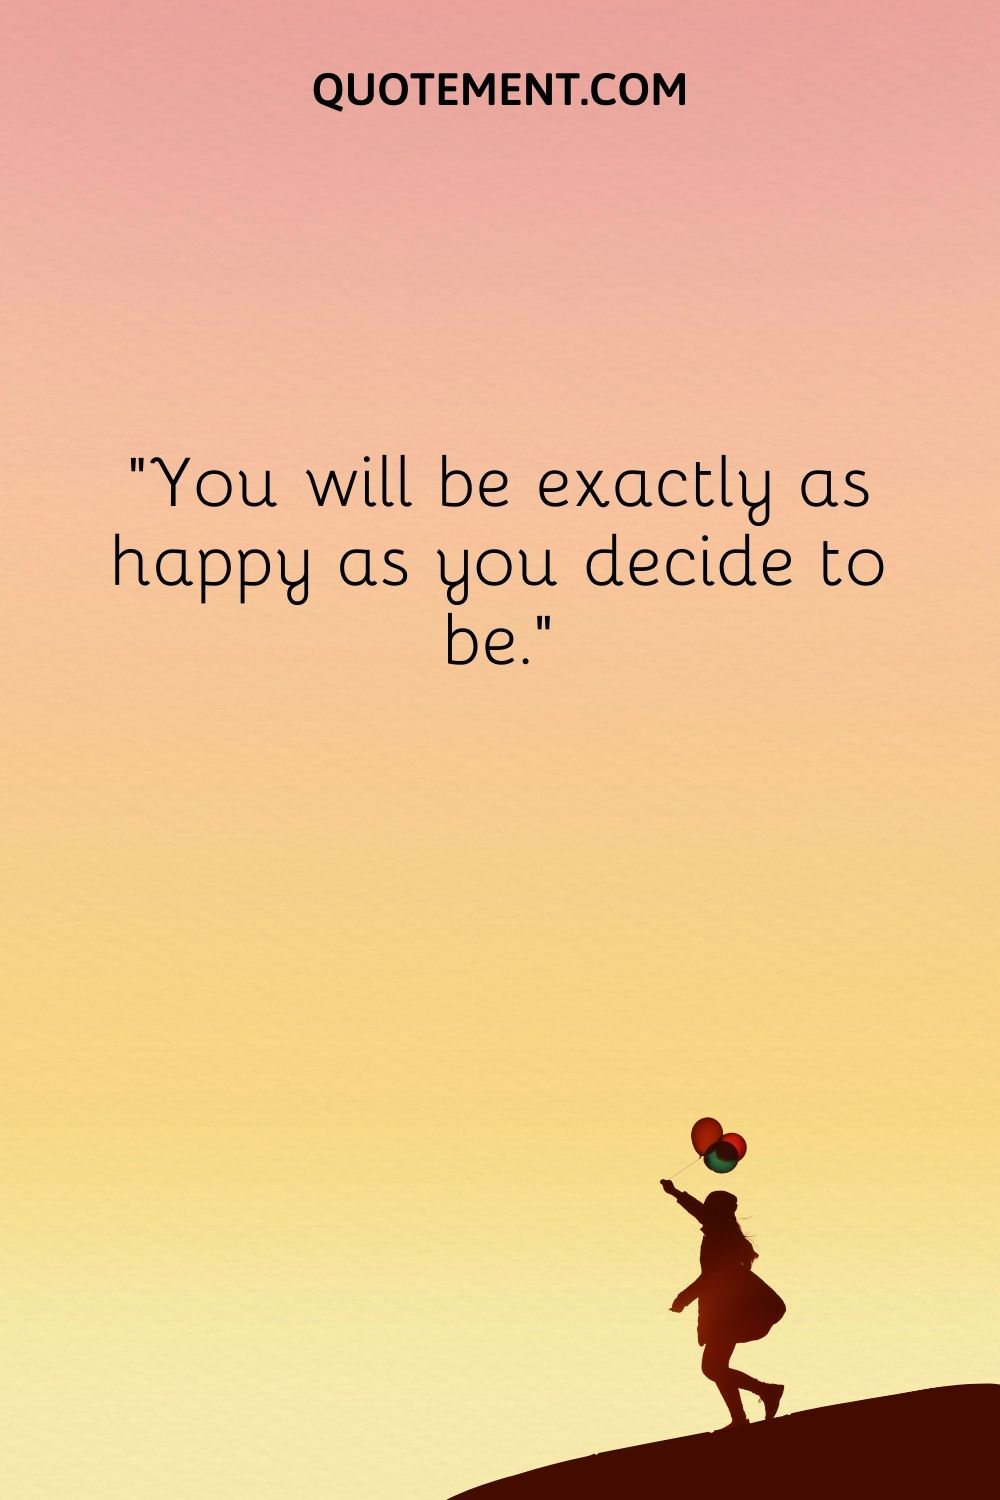 You will be exactly as happy as you decide to be